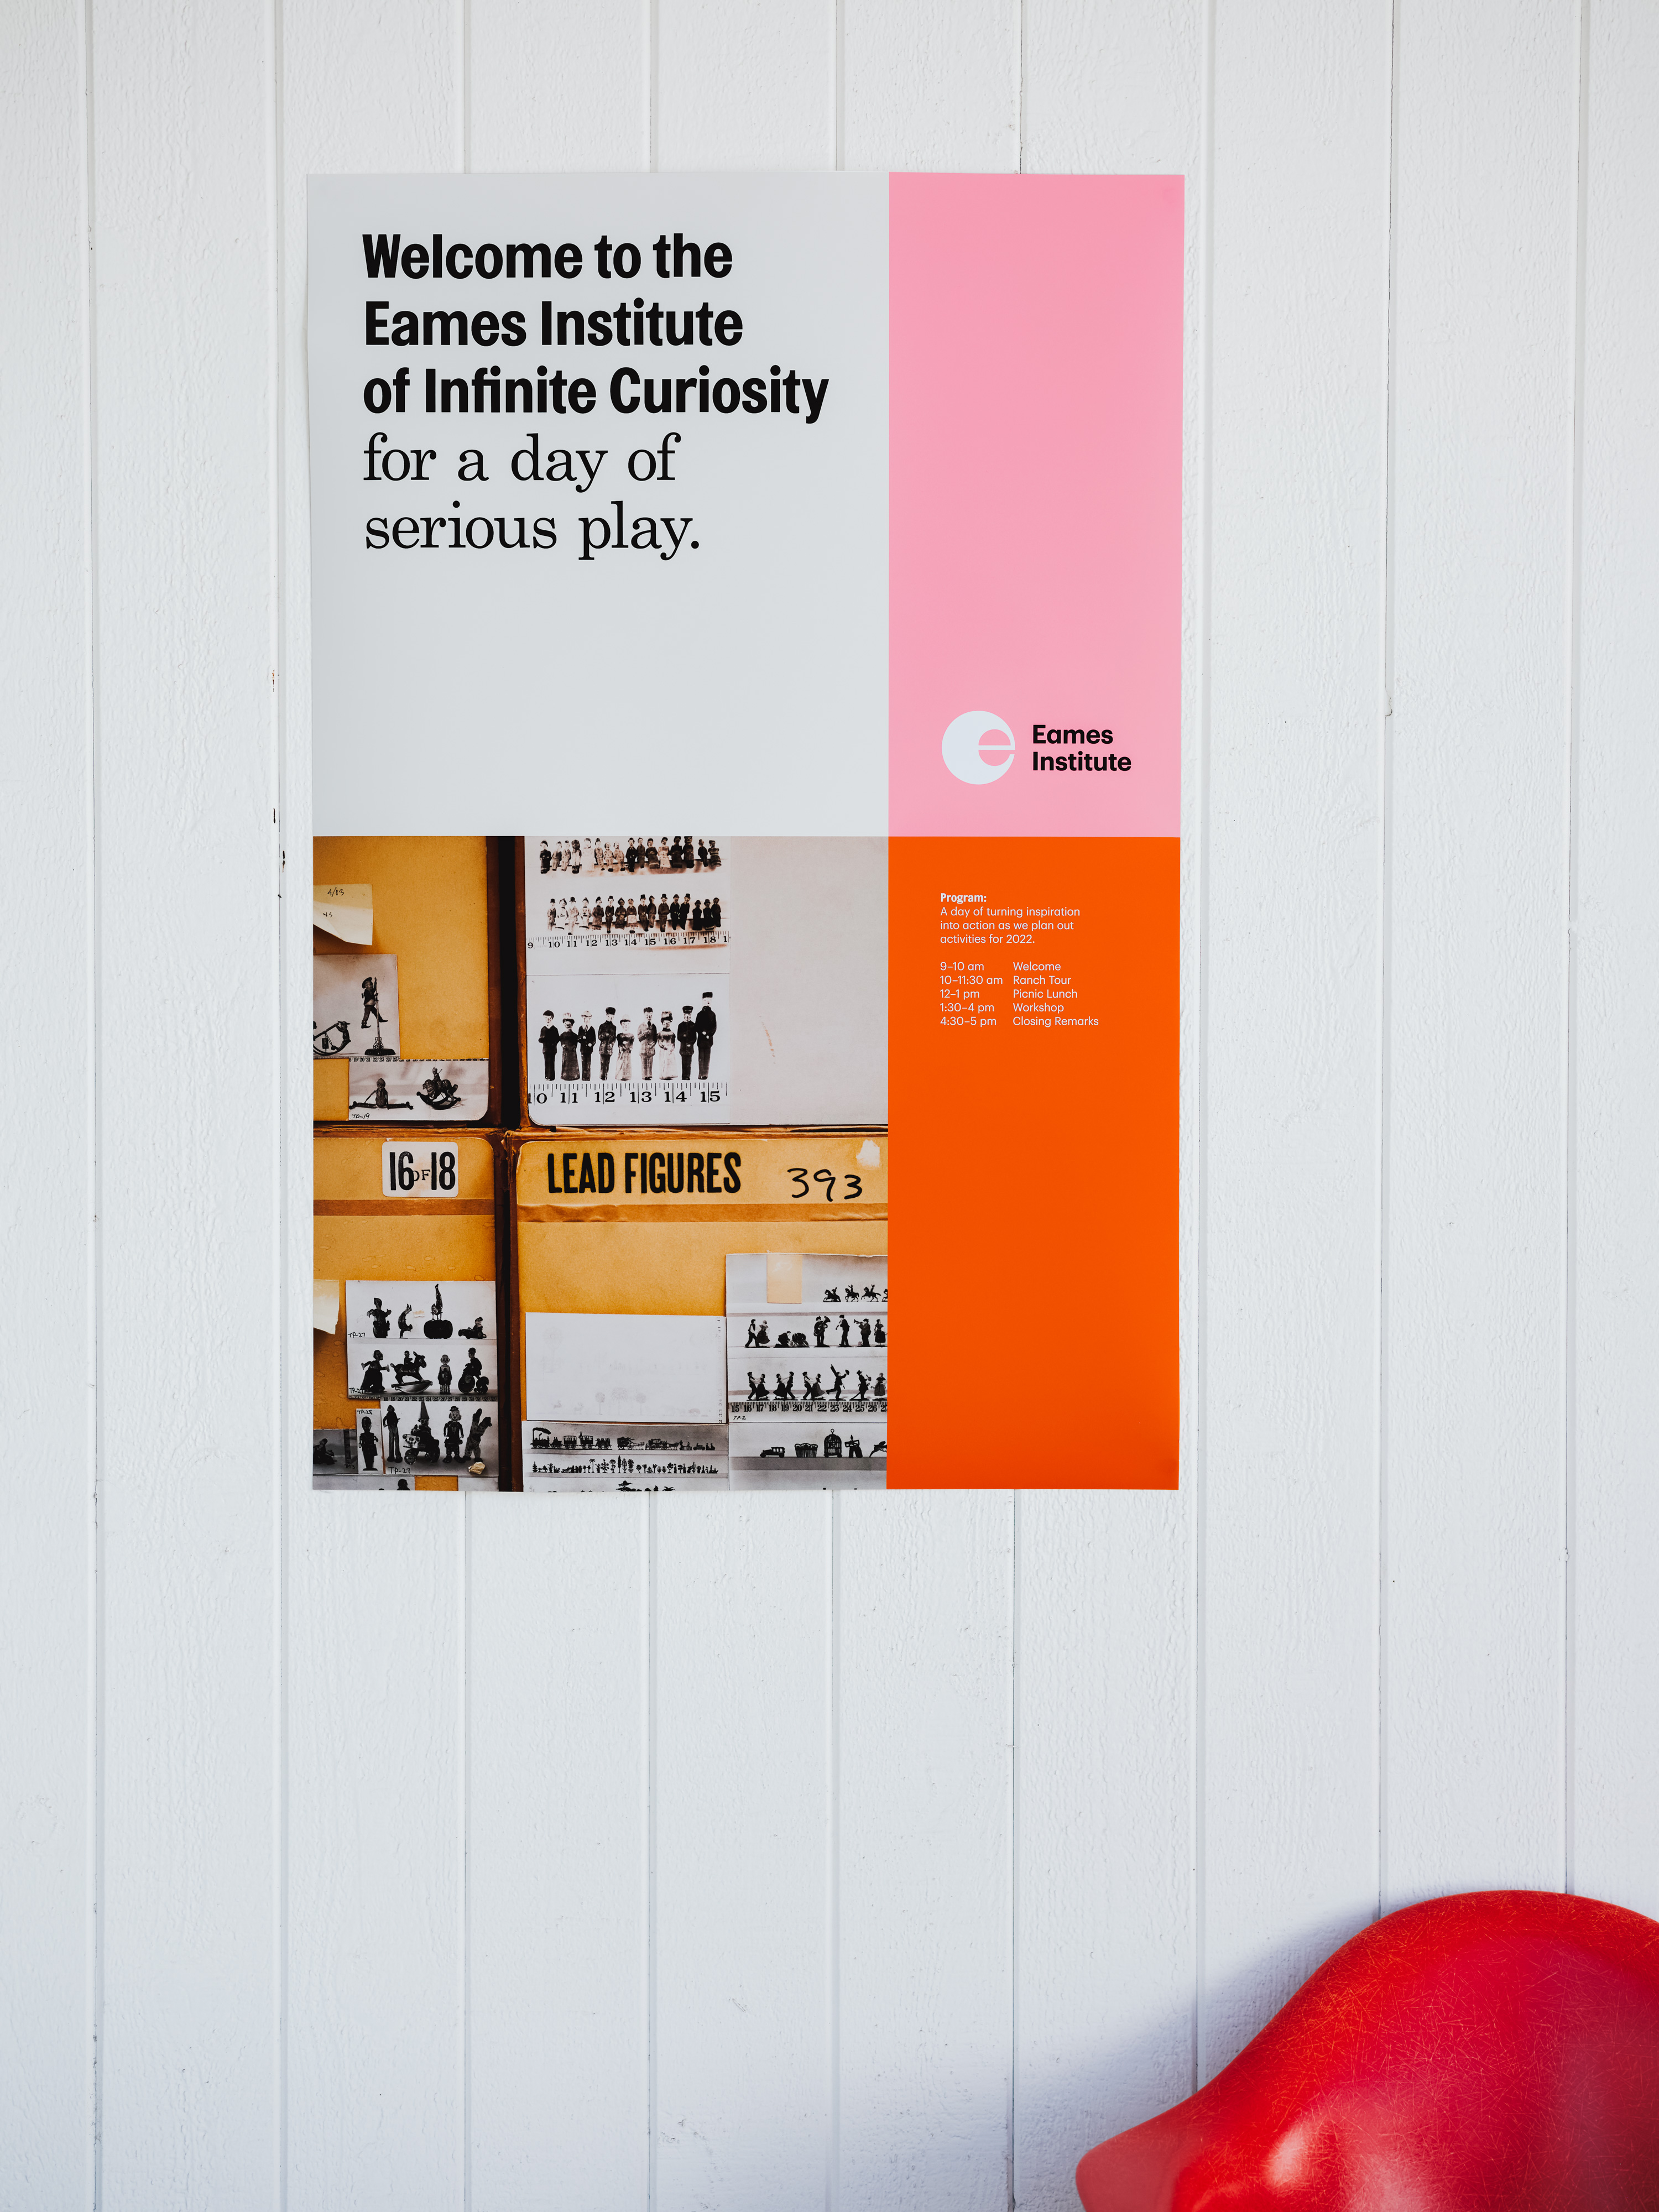 Poster designed by San Francisco-based studio Manual for The Eames Institute